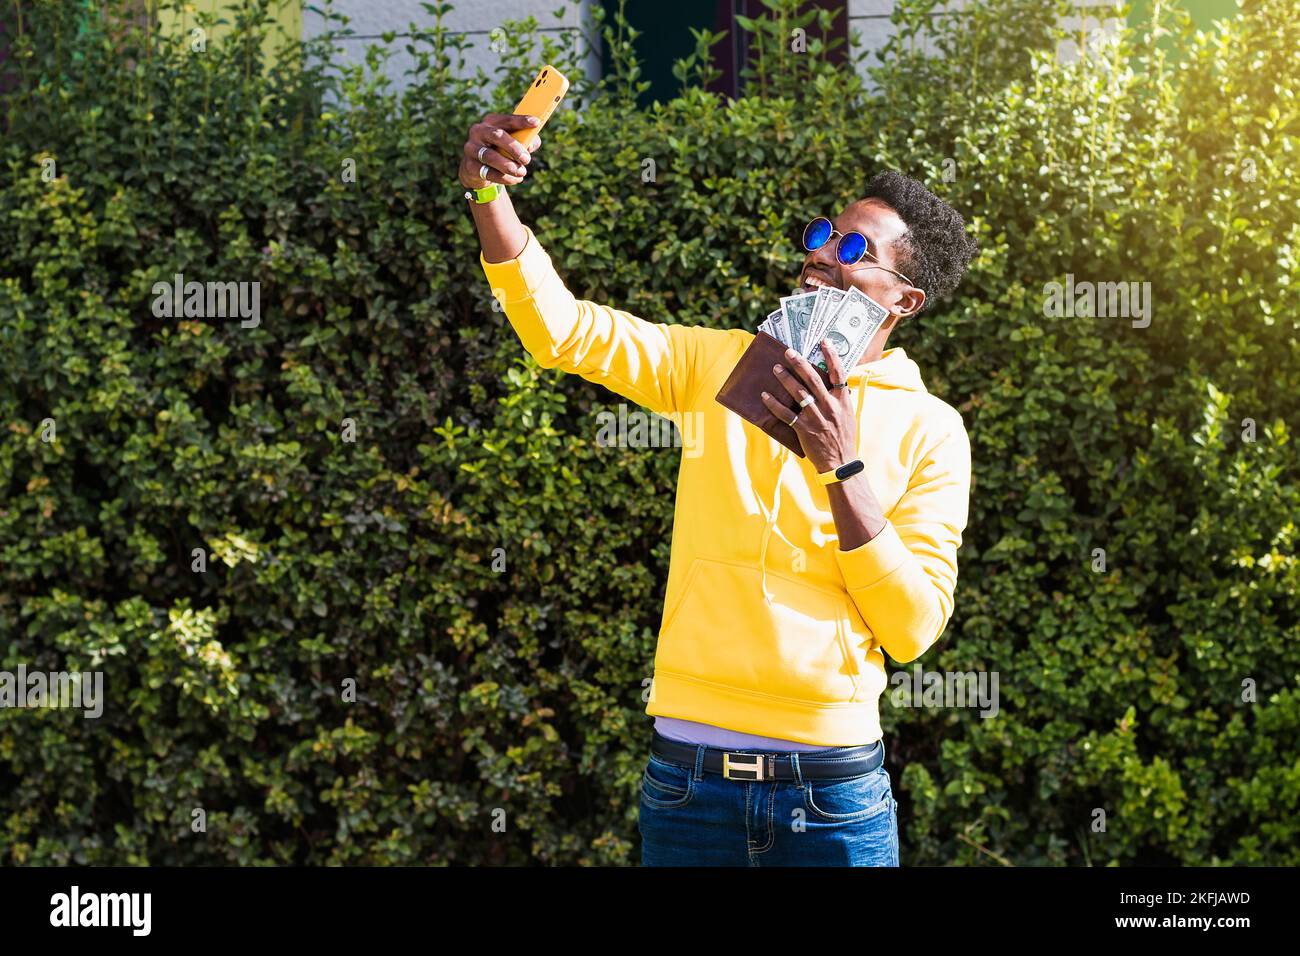 A smiling young African man wearing a yellow sweatshirt, blue jeans and sunglasses is taking a selfie with his mobile phone while holding a wallet wit Stock Photo